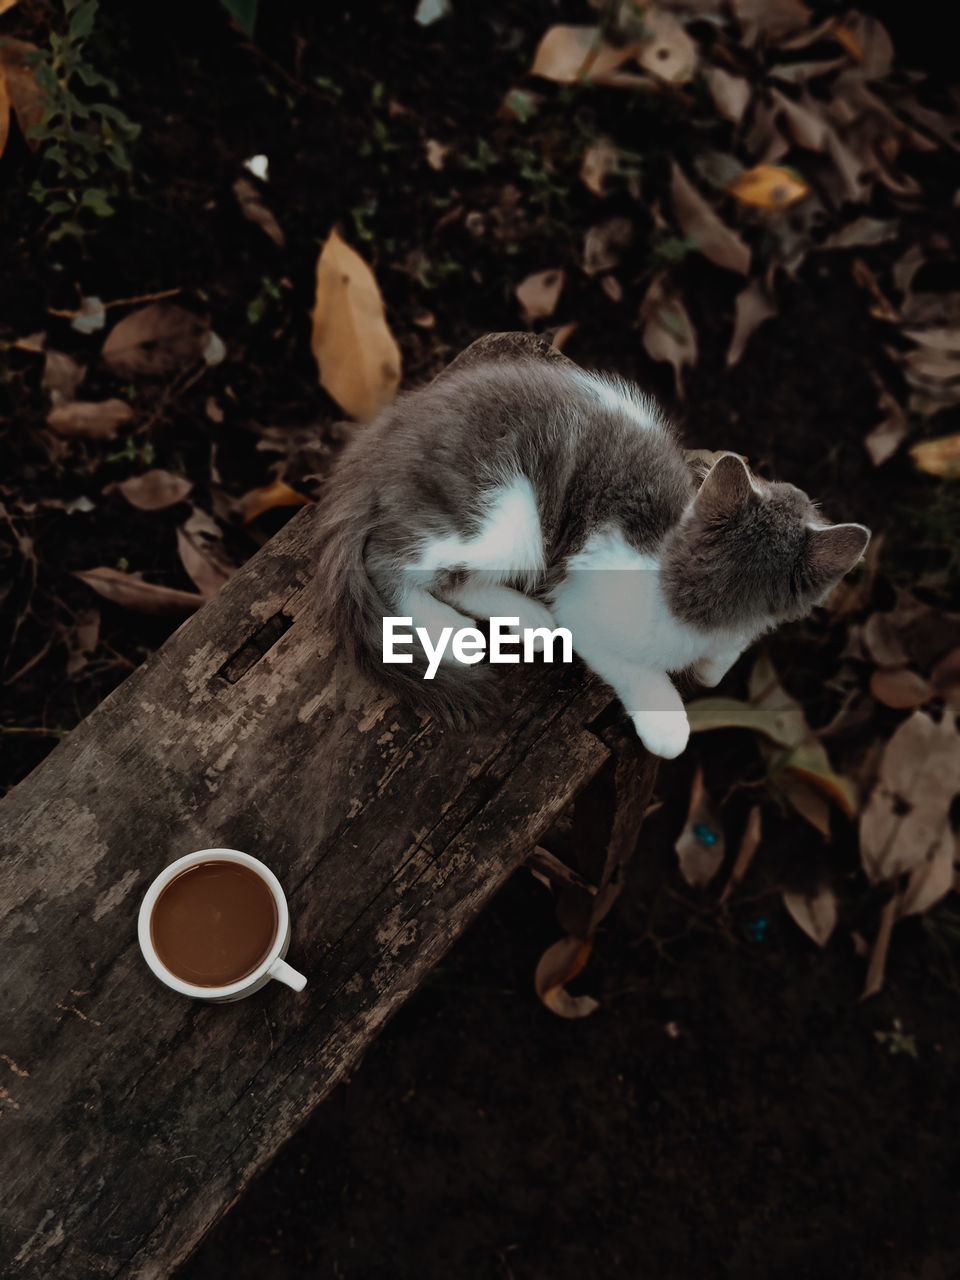 animal, animal themes, cat, mammal, one animal, food and drink, leaf, drink, domestic animals, pet, no people, cup, plant part, nature, food, carnivore, mug, wildlife, coffee cup, high angle view, coffee, wood, domestic cat, feline, outdoors, autumn